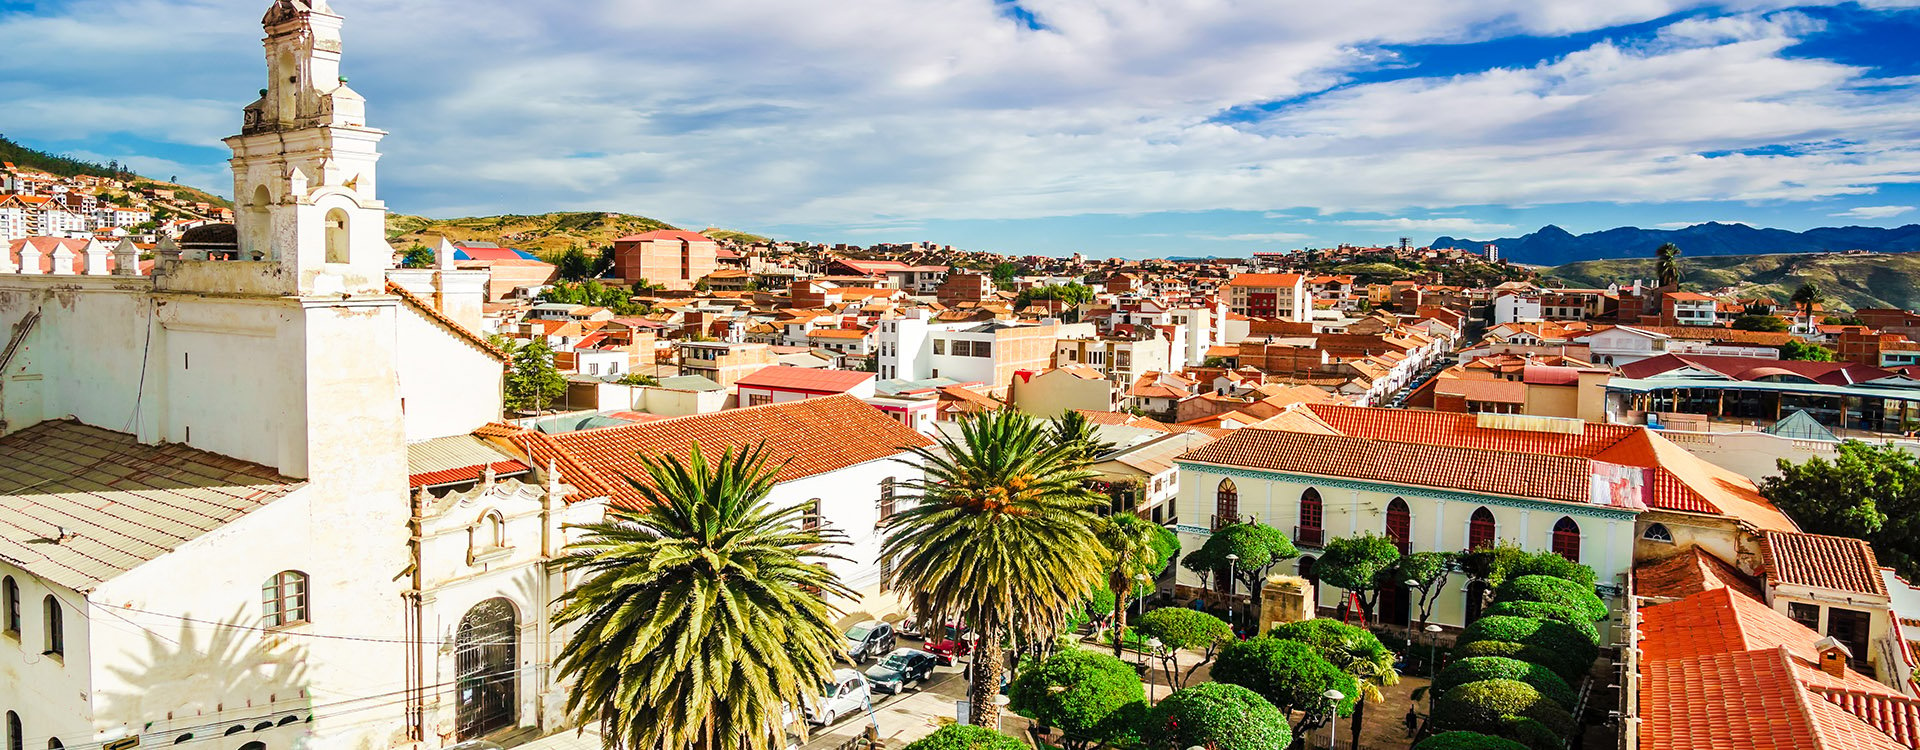 View on colonial town of Sucre in Bolivia